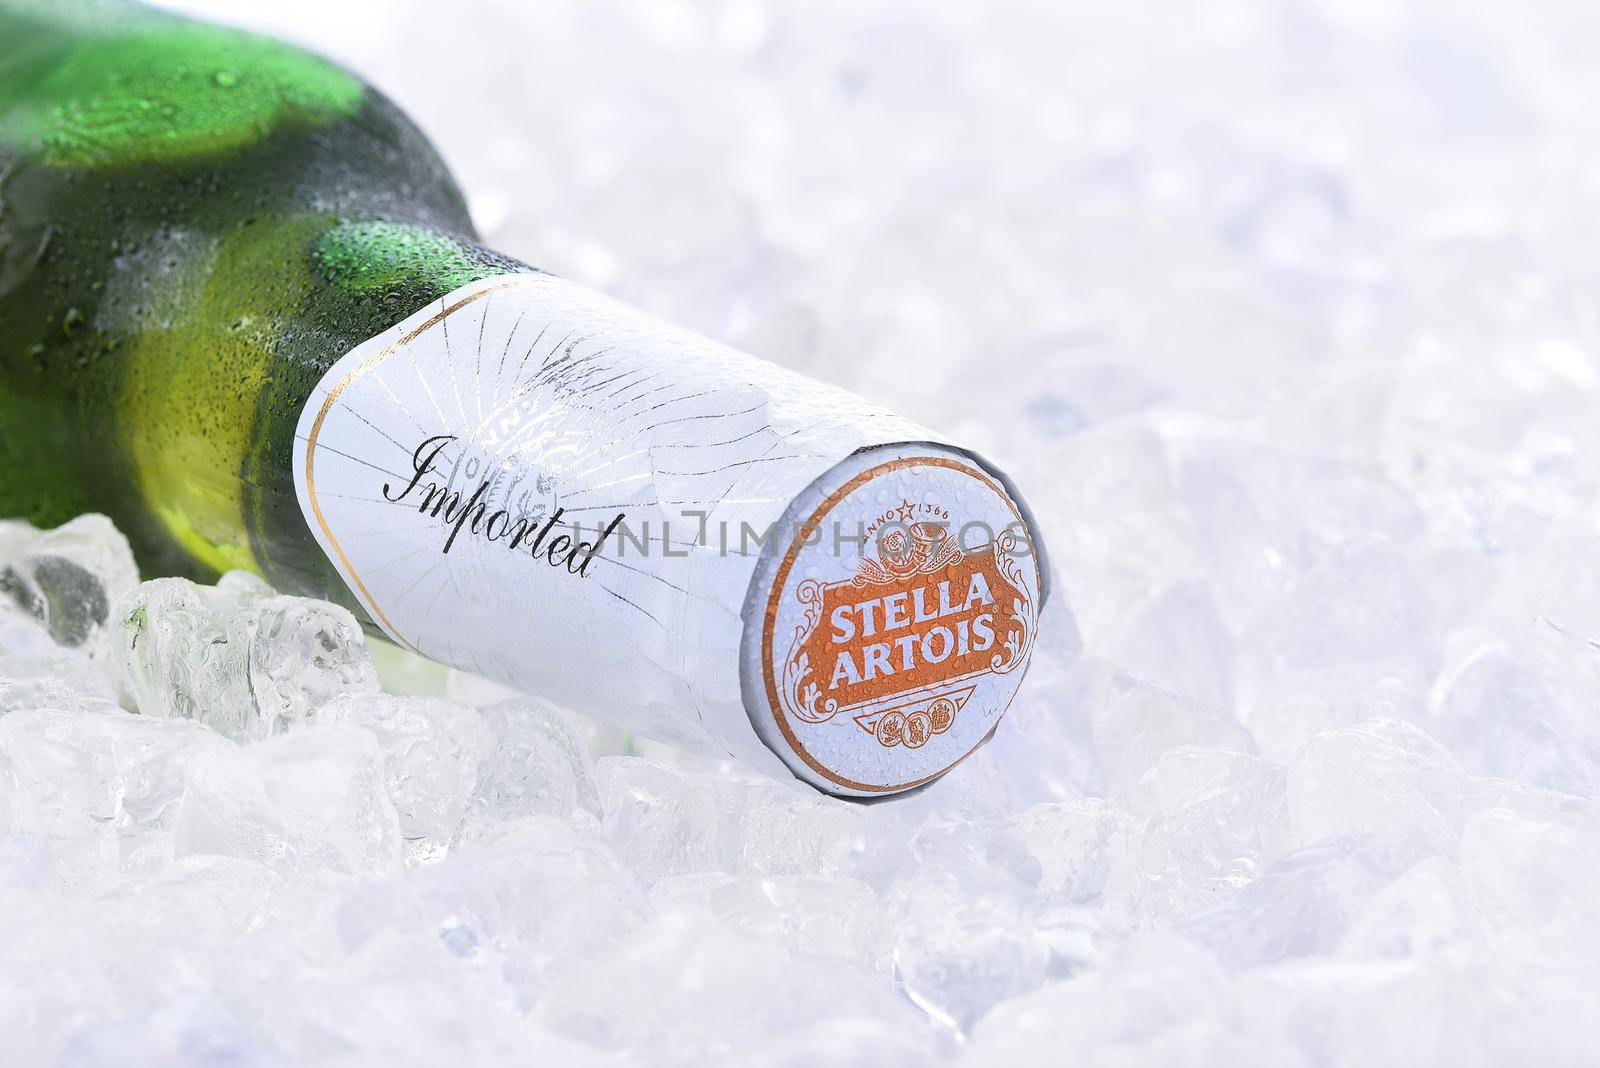 IRVINE, CA - AUGUST 26, 2016: A bottle of Stella Artois Beer closeup on Ice. Stella has been brewed in Leuven, Belgium, since 1926, and launched as a festive beer, named after the Christmas star.